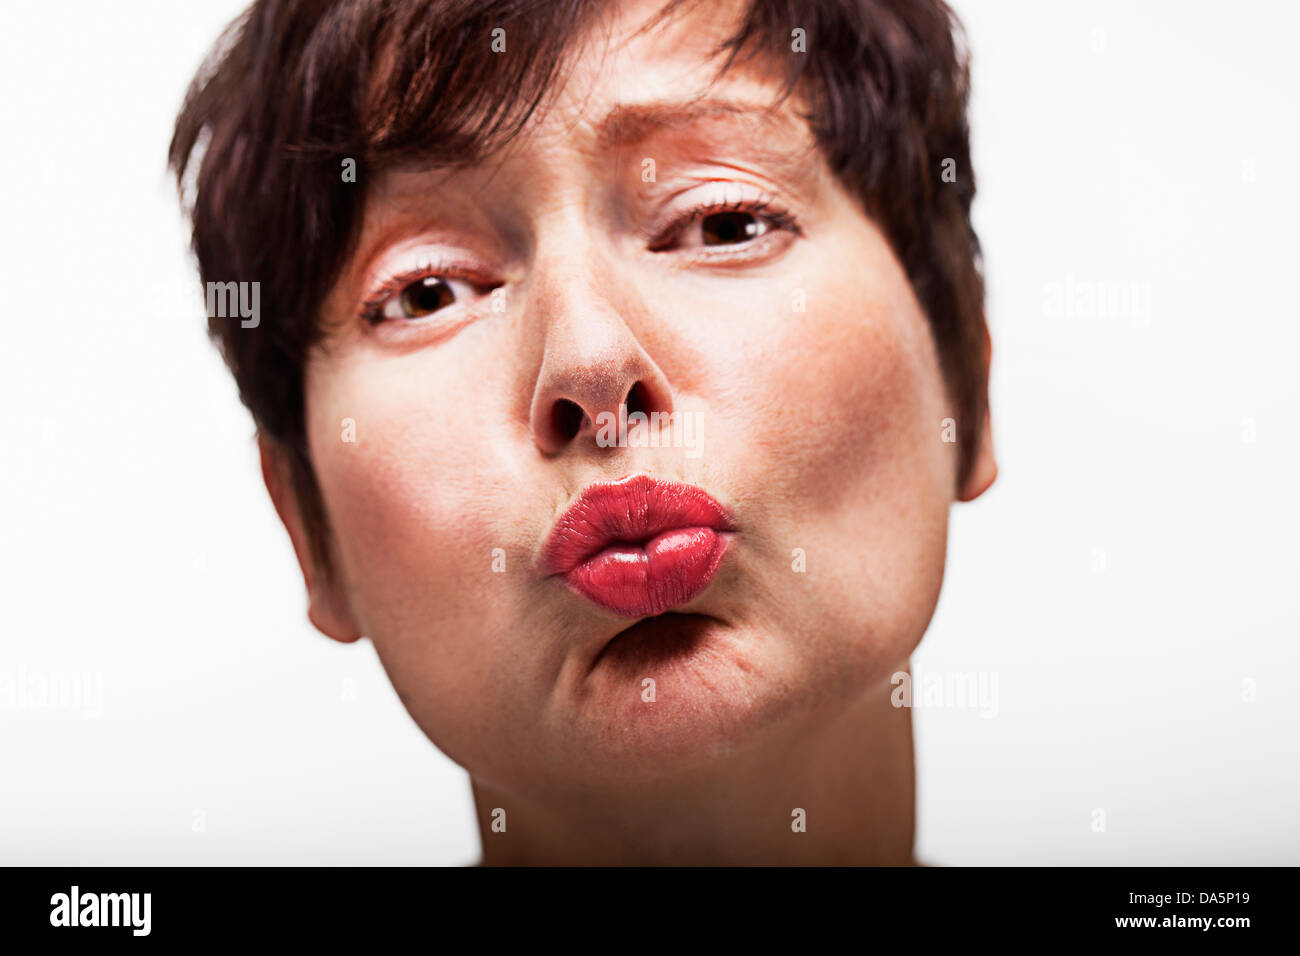 woman with pouting lips Stock Photo